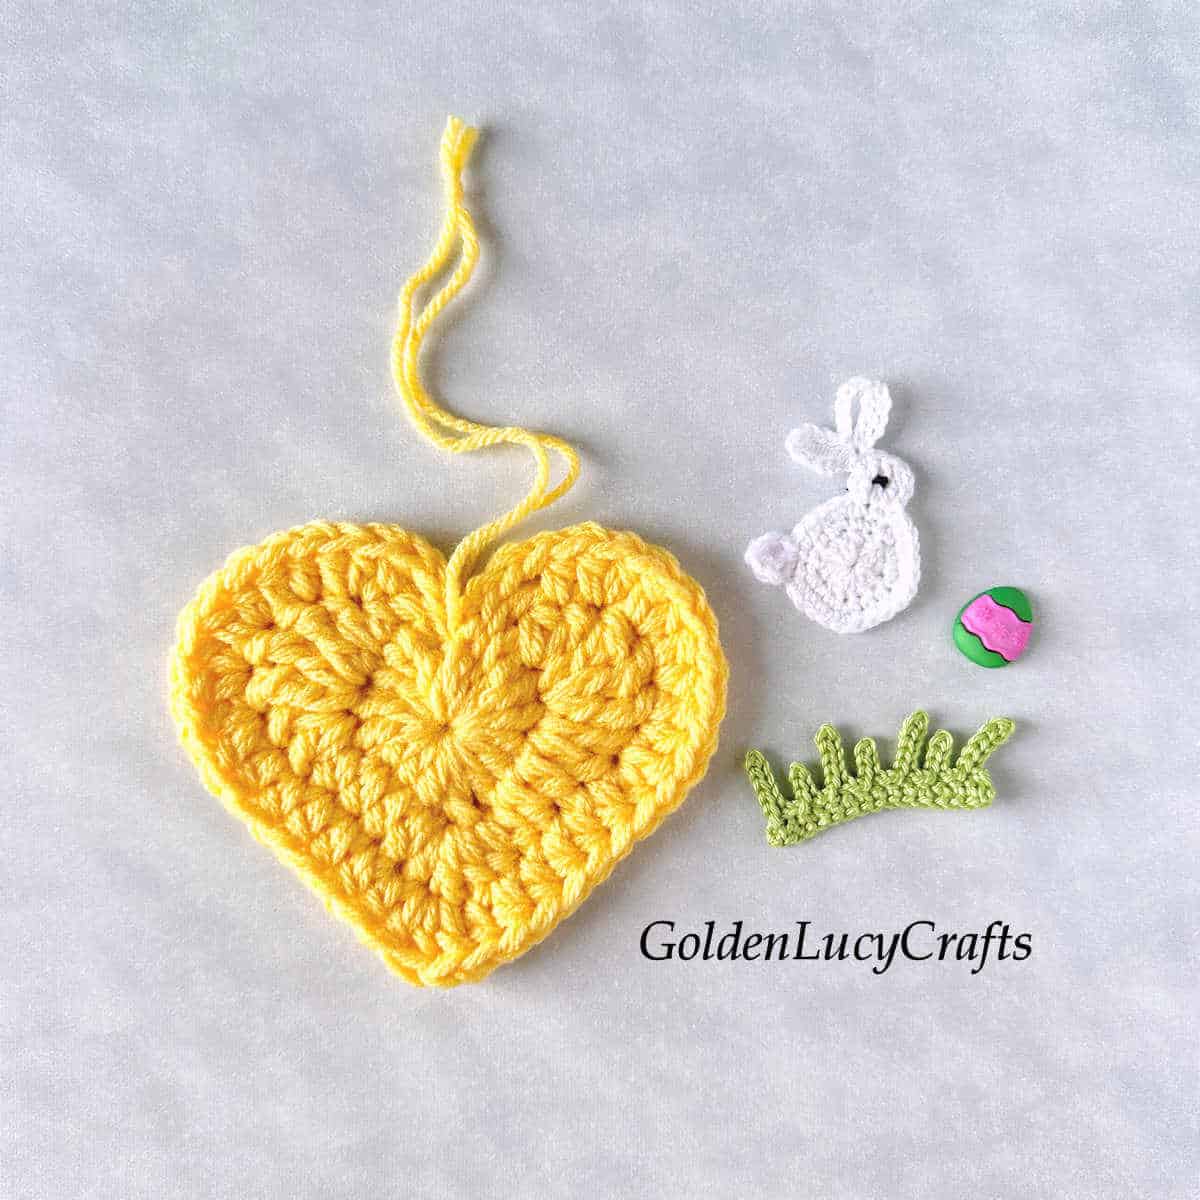 Crochet yellow heart, white bunny, grass and Easter egg craft button.